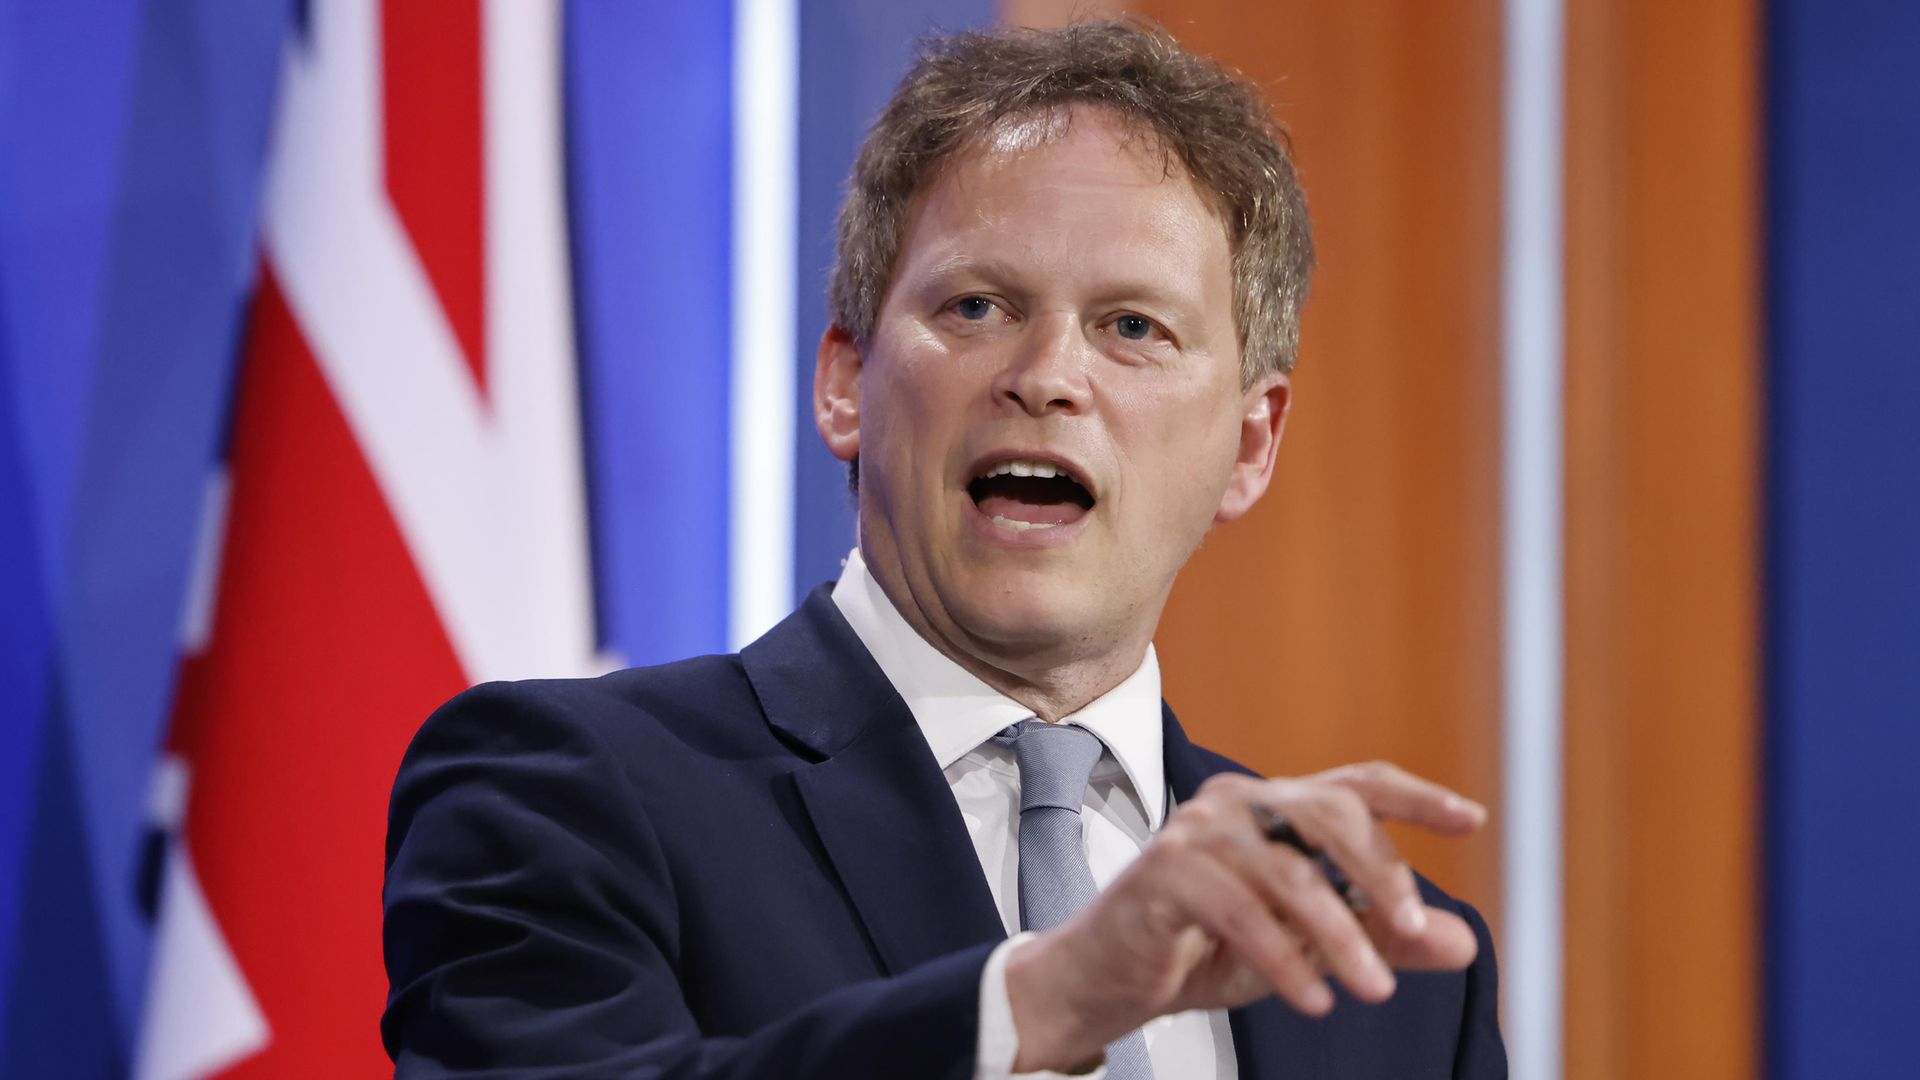 Transport secretary Grant Shapps during a media briefing in Downing Street, London - Credit: PA